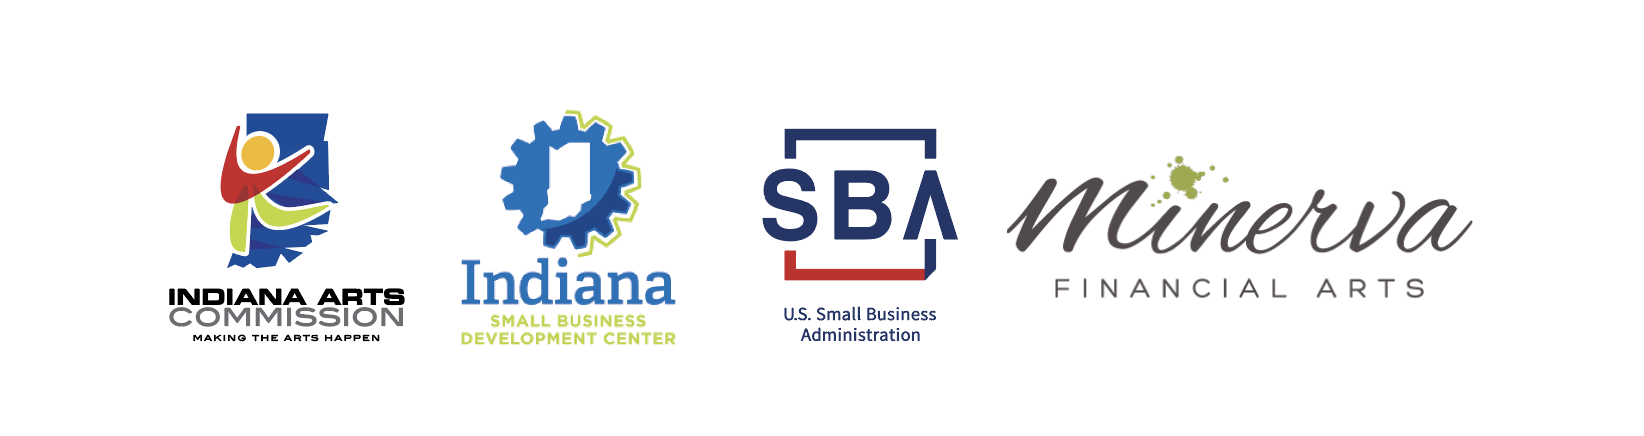 Indiana Arts Commission, Indiana Small Business Development Center, U.S. Small Business Administration, and Minerva Financial Arts logos